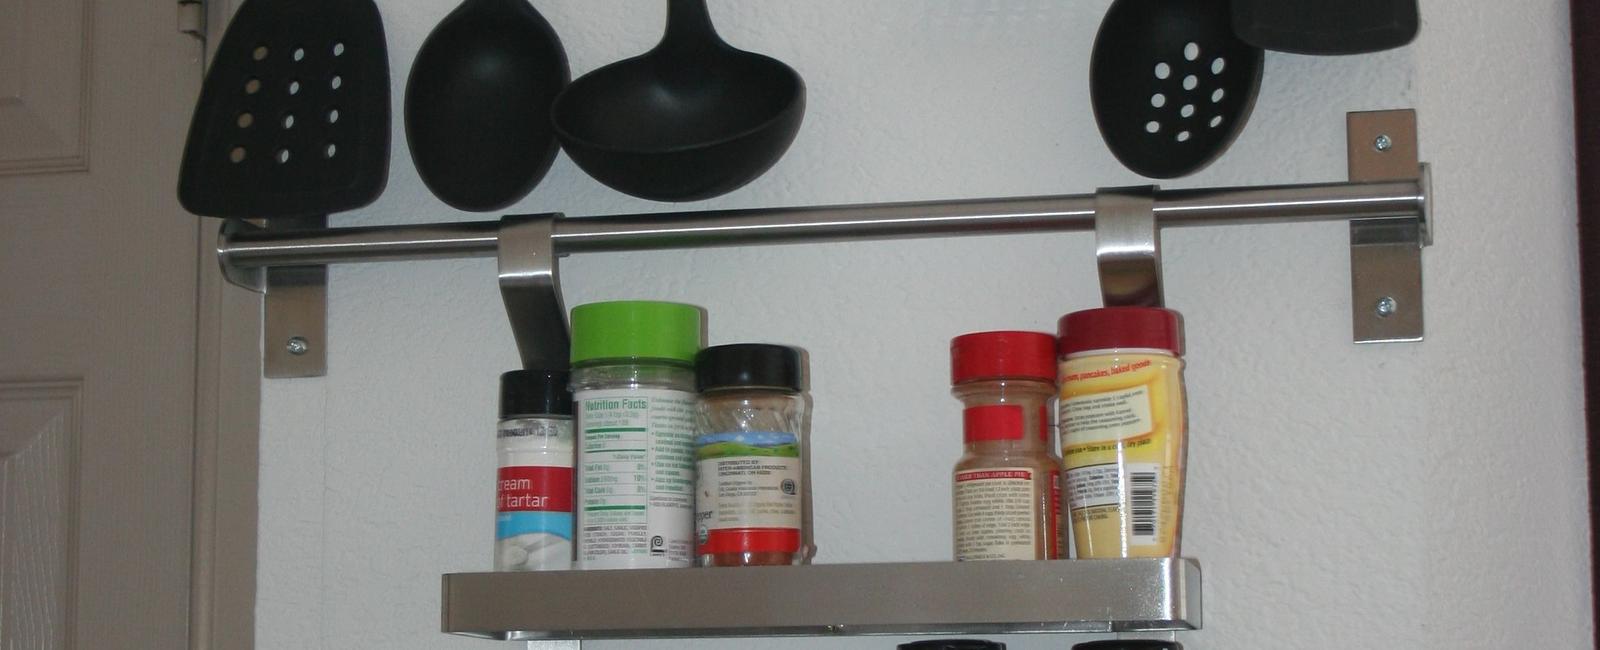 Hang cumbersome utensils on hooks inside cabinets too